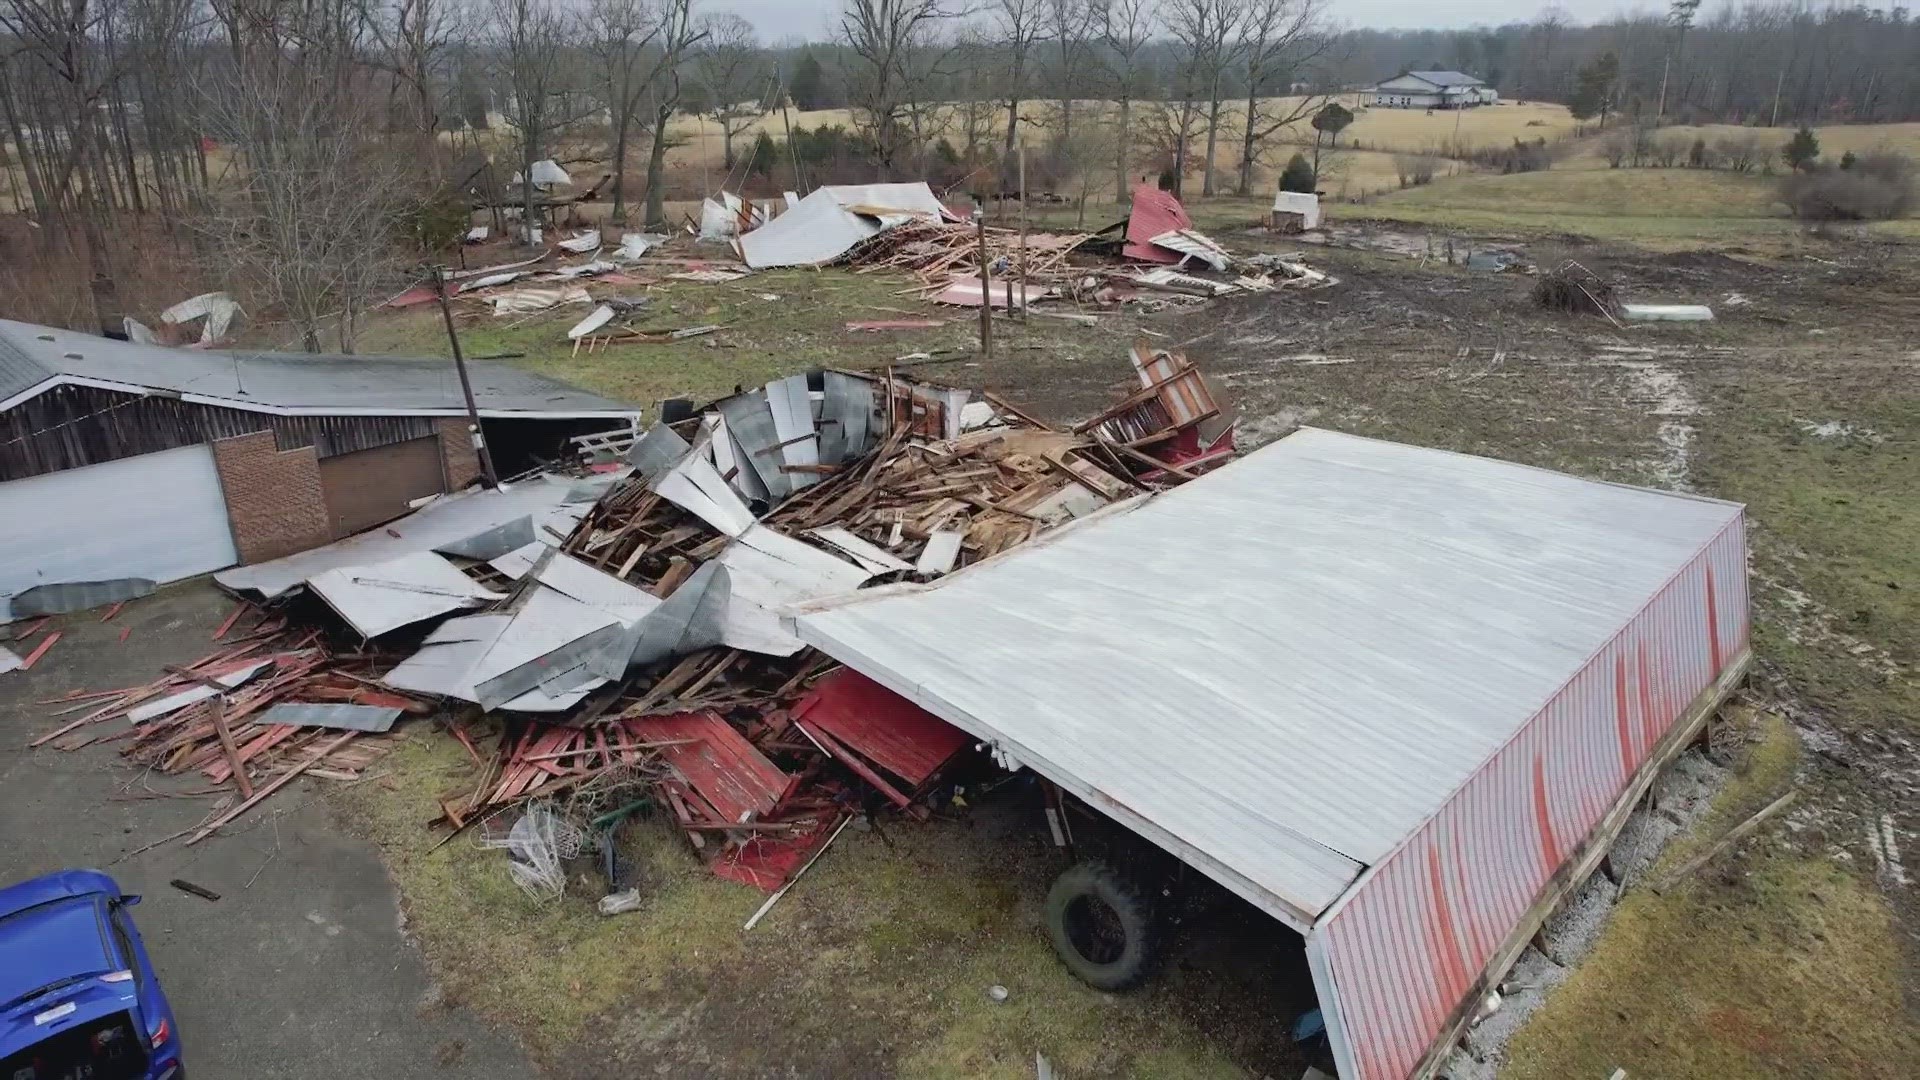 The National Weather Service Louisville said an EF-1 tornado touched down in Henryville, Indiana and Henry County, Kentucky on Saturday.